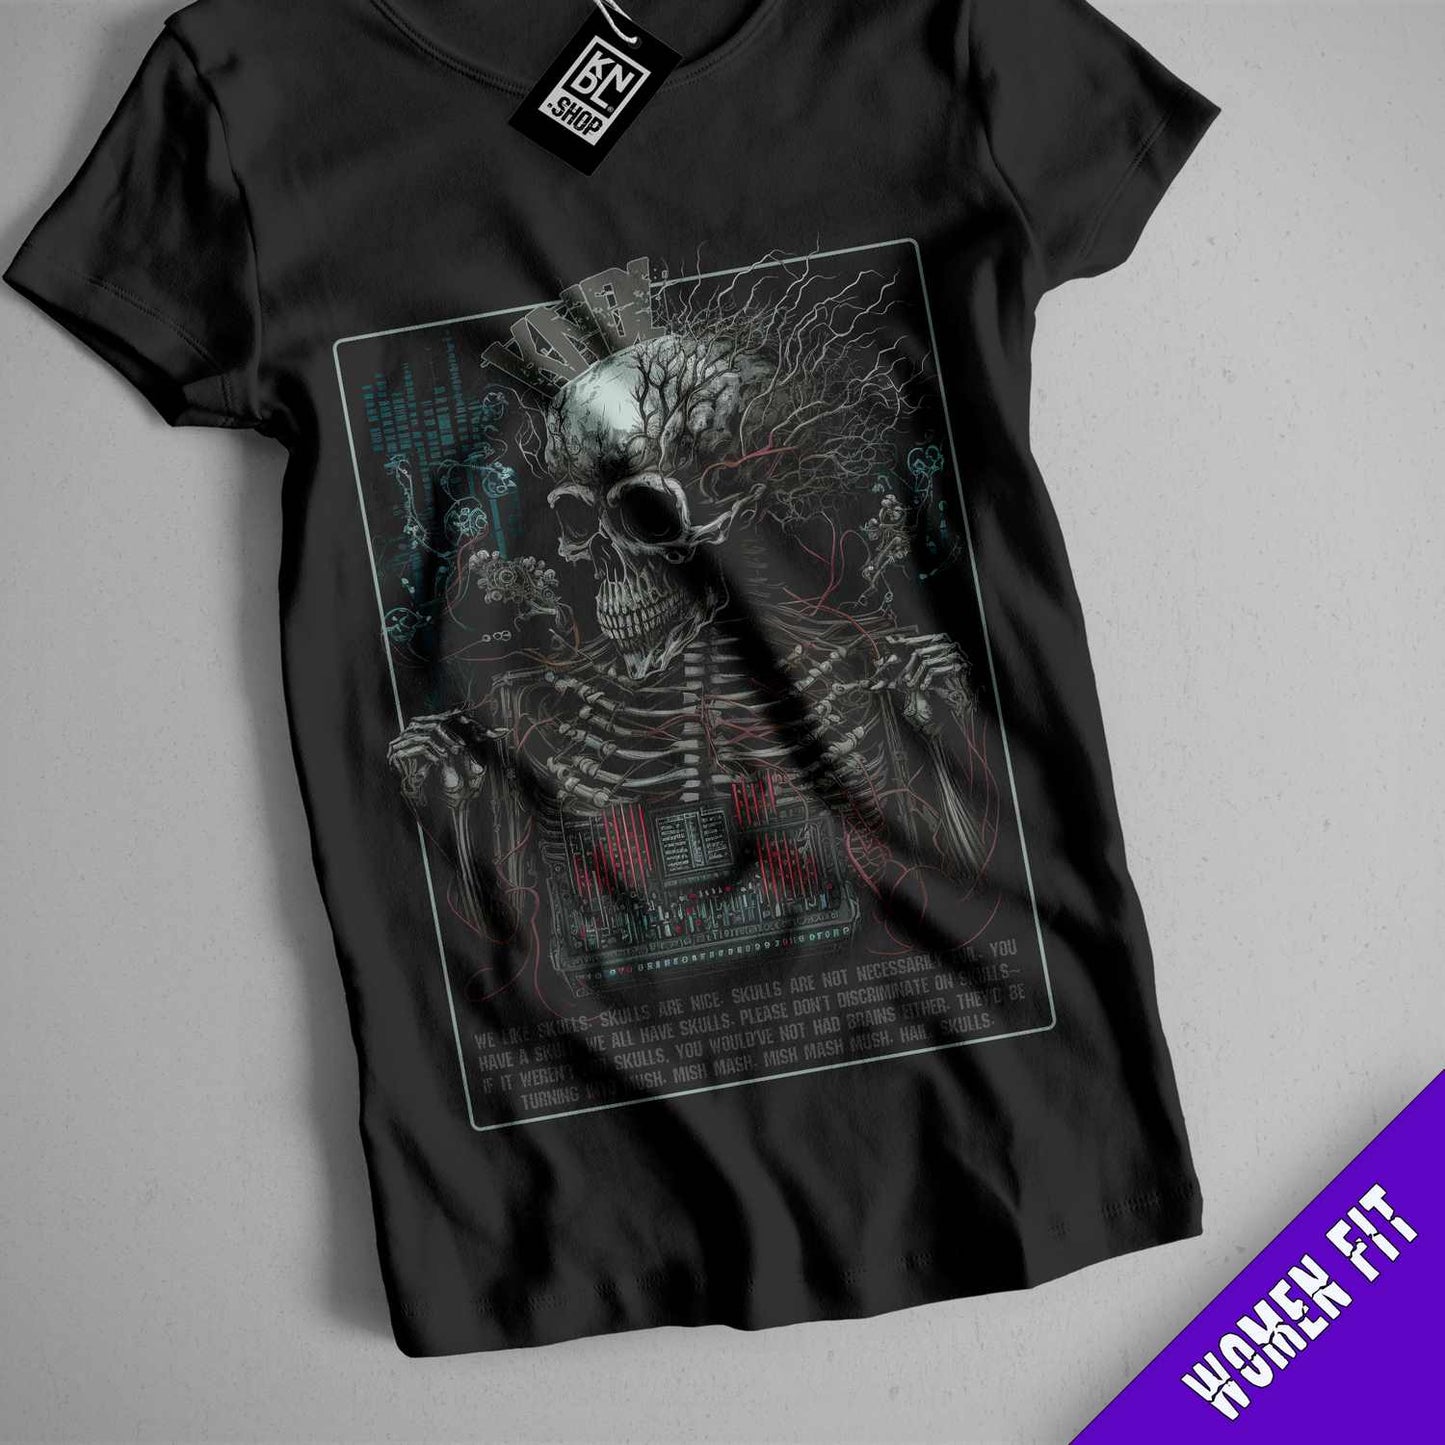 a black t - shirt with a skeleton on it